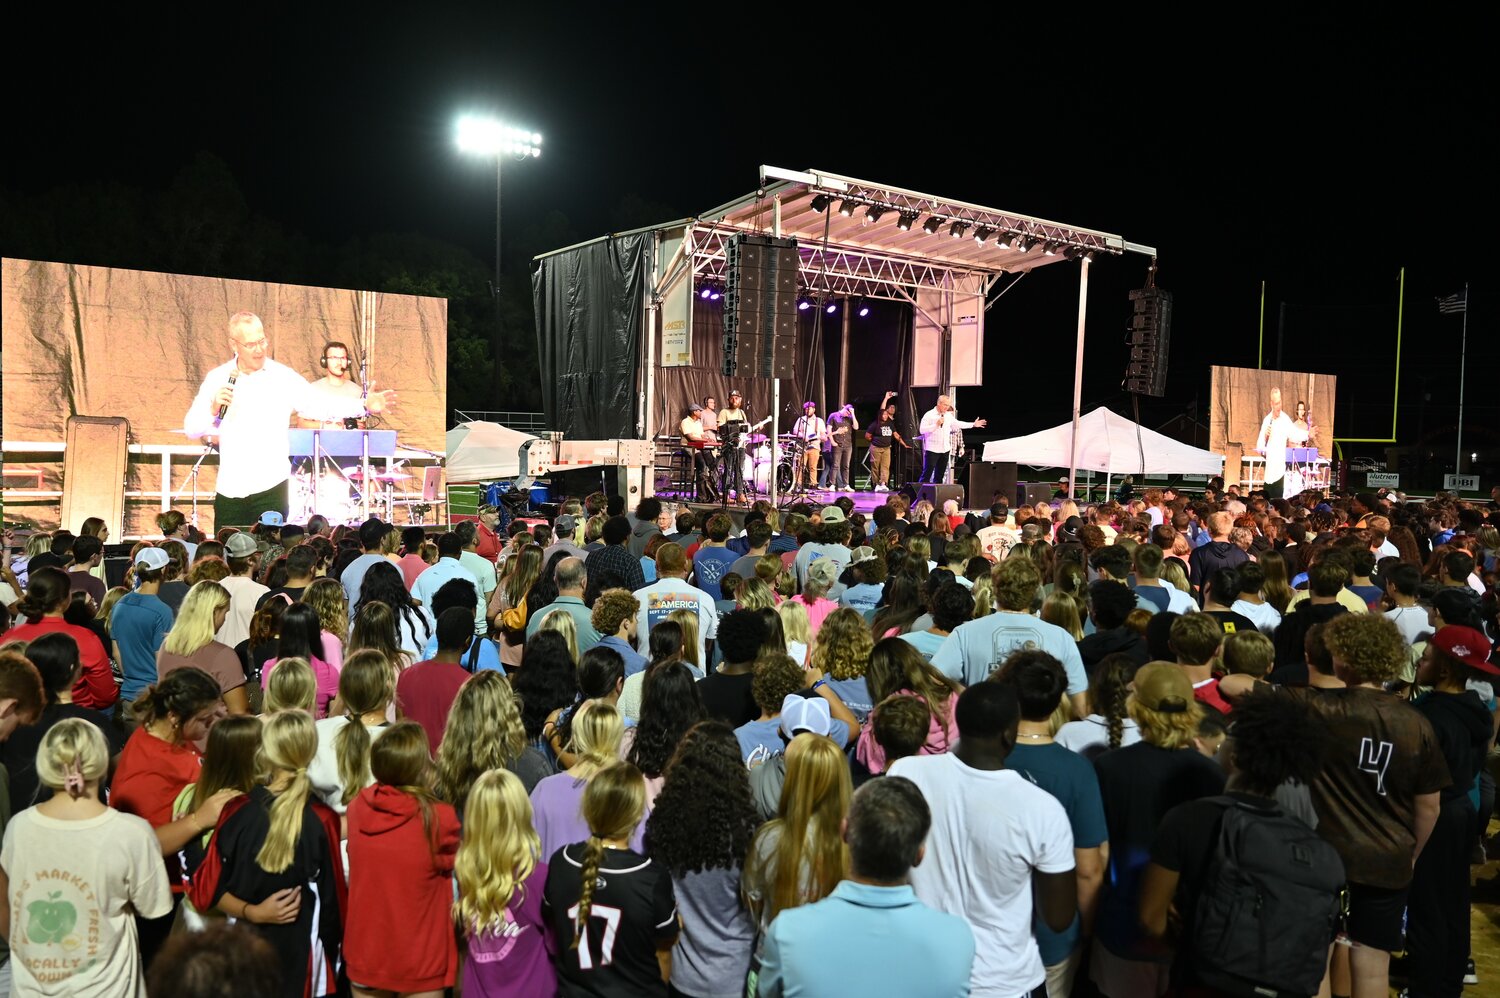 People respond to an altar call at a Rick Gage crusade in south Georgia last fall. Some 1,600 new believers made commitments to Christ at the event. (Index/Roger Alford)